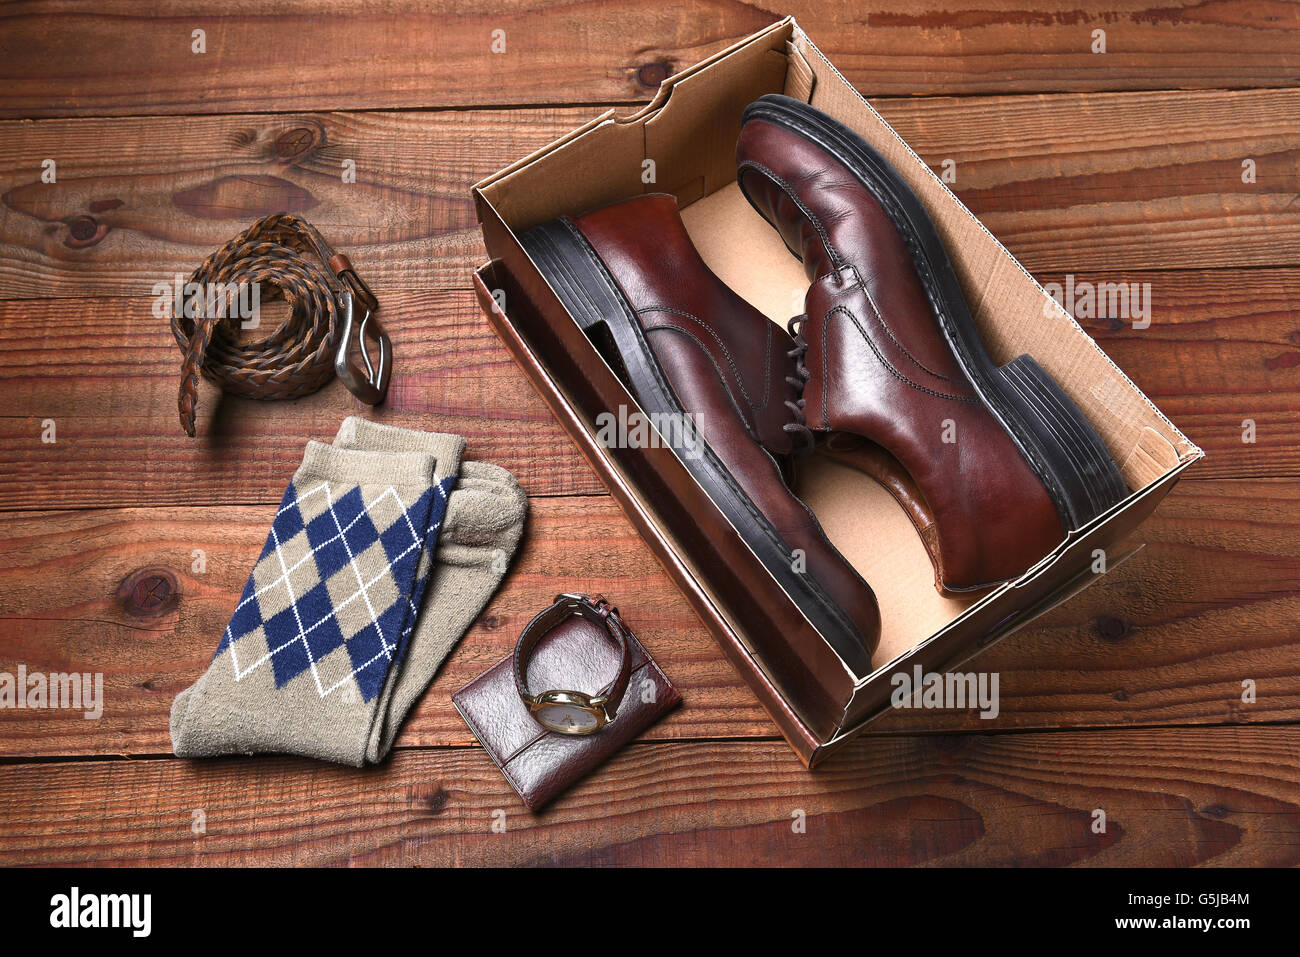 Overhead view of a pair of men's shoes in a shoebox. Socks, belt, watch and wallet lie on the floor next to the box. Stock Photo